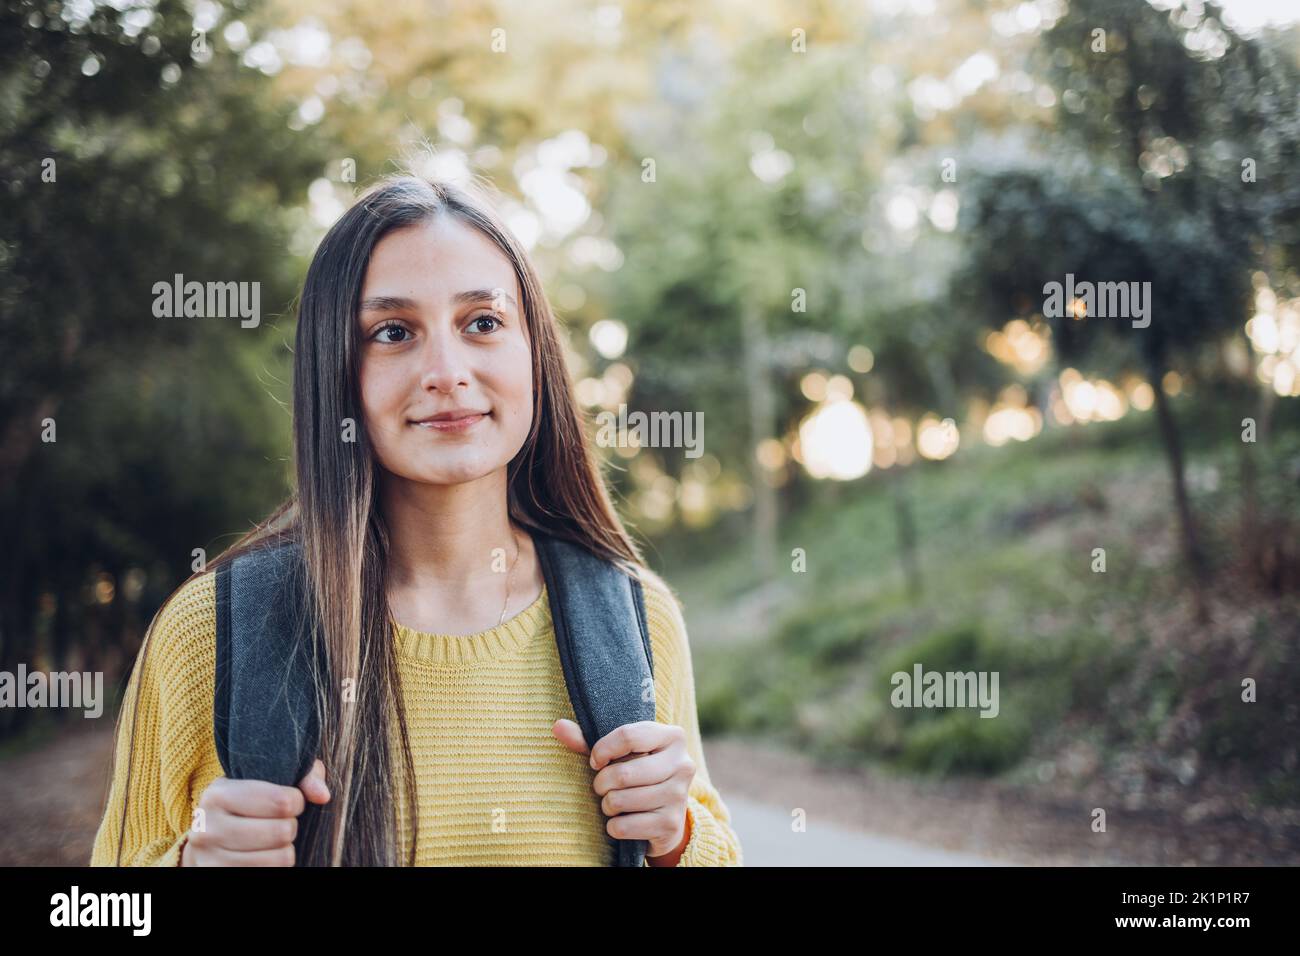 Smiling female university student wearing a yellow sweater and a backpack in the campus park road. Innocent smile Stock Photo